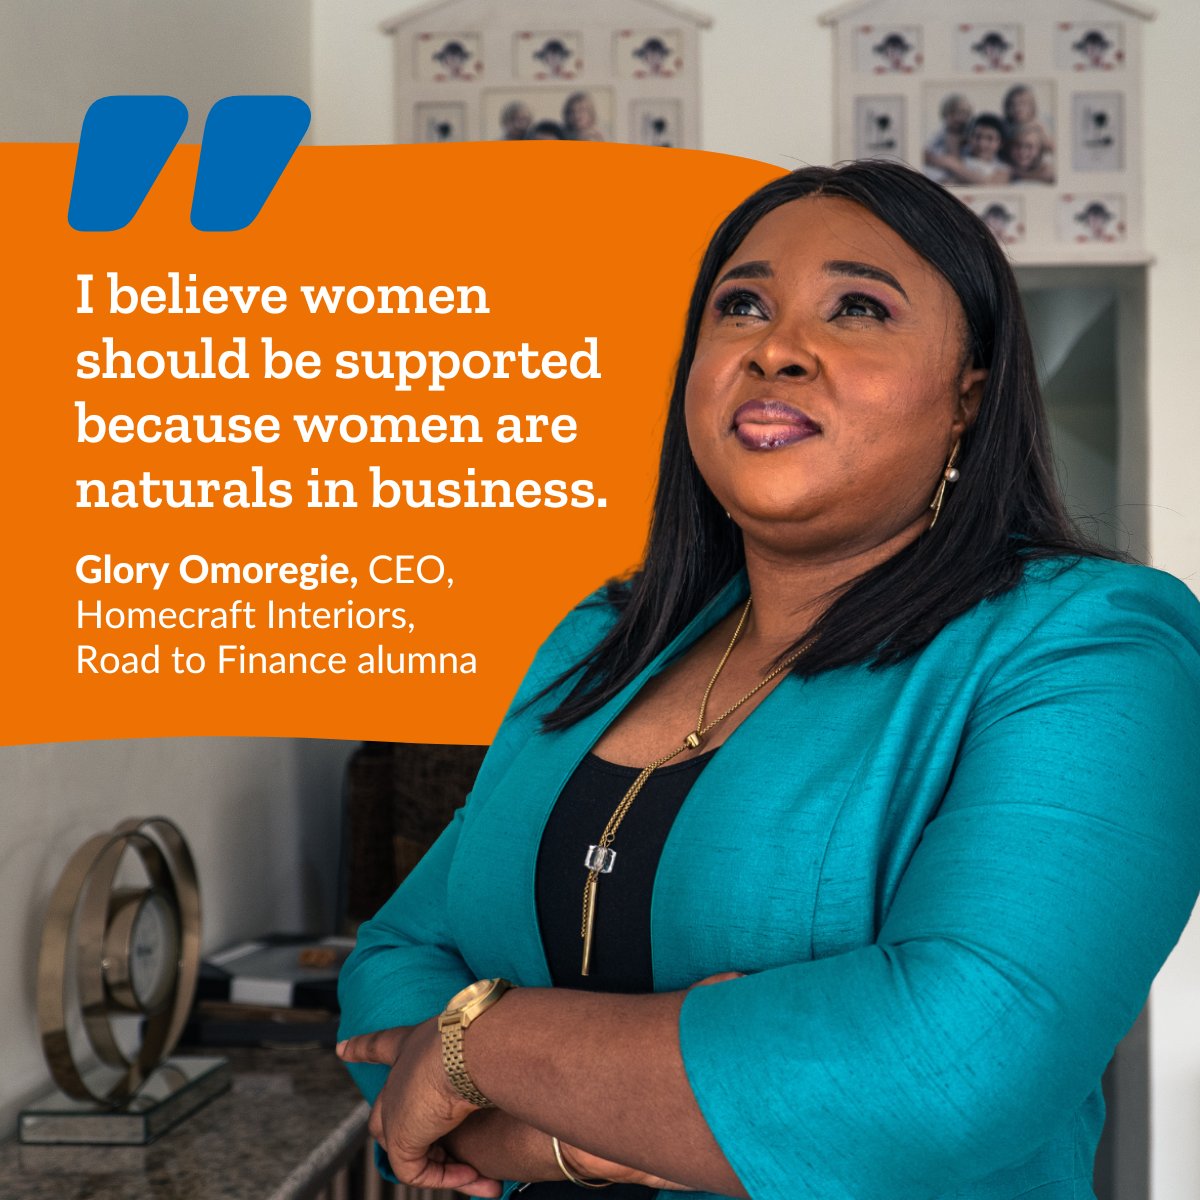 Glory Omoregie is CEO of Homecraft Interiors in Nigeria. Road to Finance supported her to grow her network & improve her financial literacy so that her business can continue to thrive: cherieblairfoundation.org/impact/her-sto… Thank you to @XOMFoundation & @EDC4SME for making this possible.